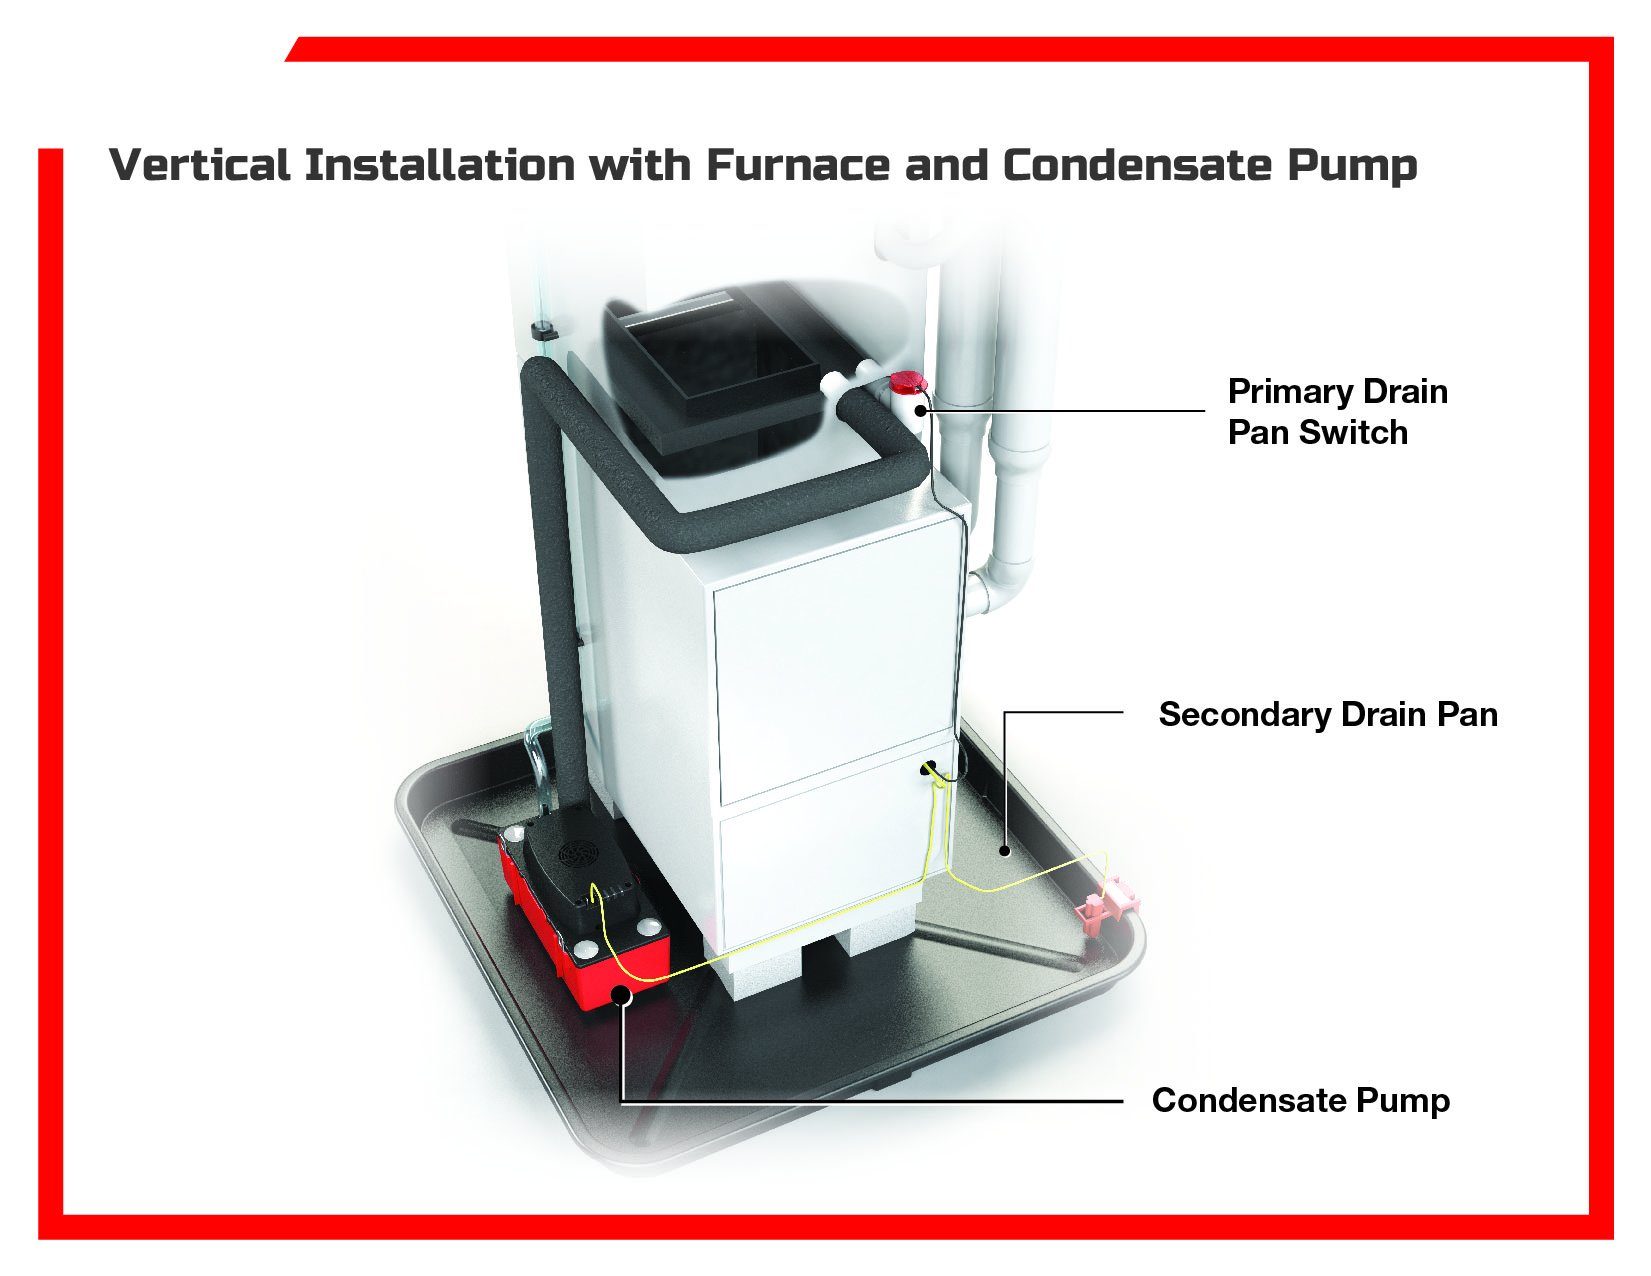 Vertical Installation with Furnace and Condensate Pump